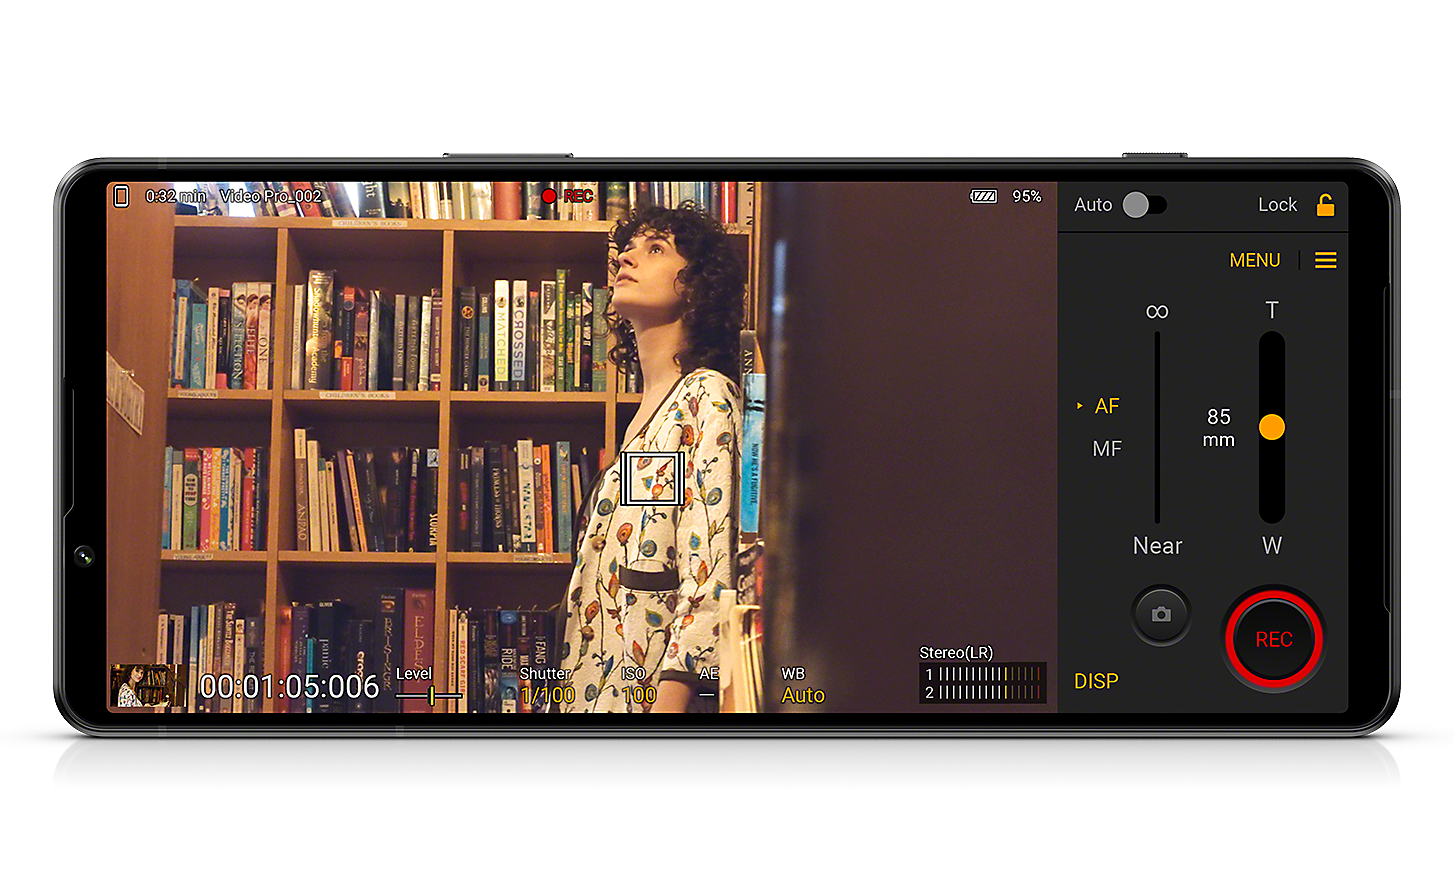 Xperia 1 IV displaying Videography Pro interface and an image of a woman in a library